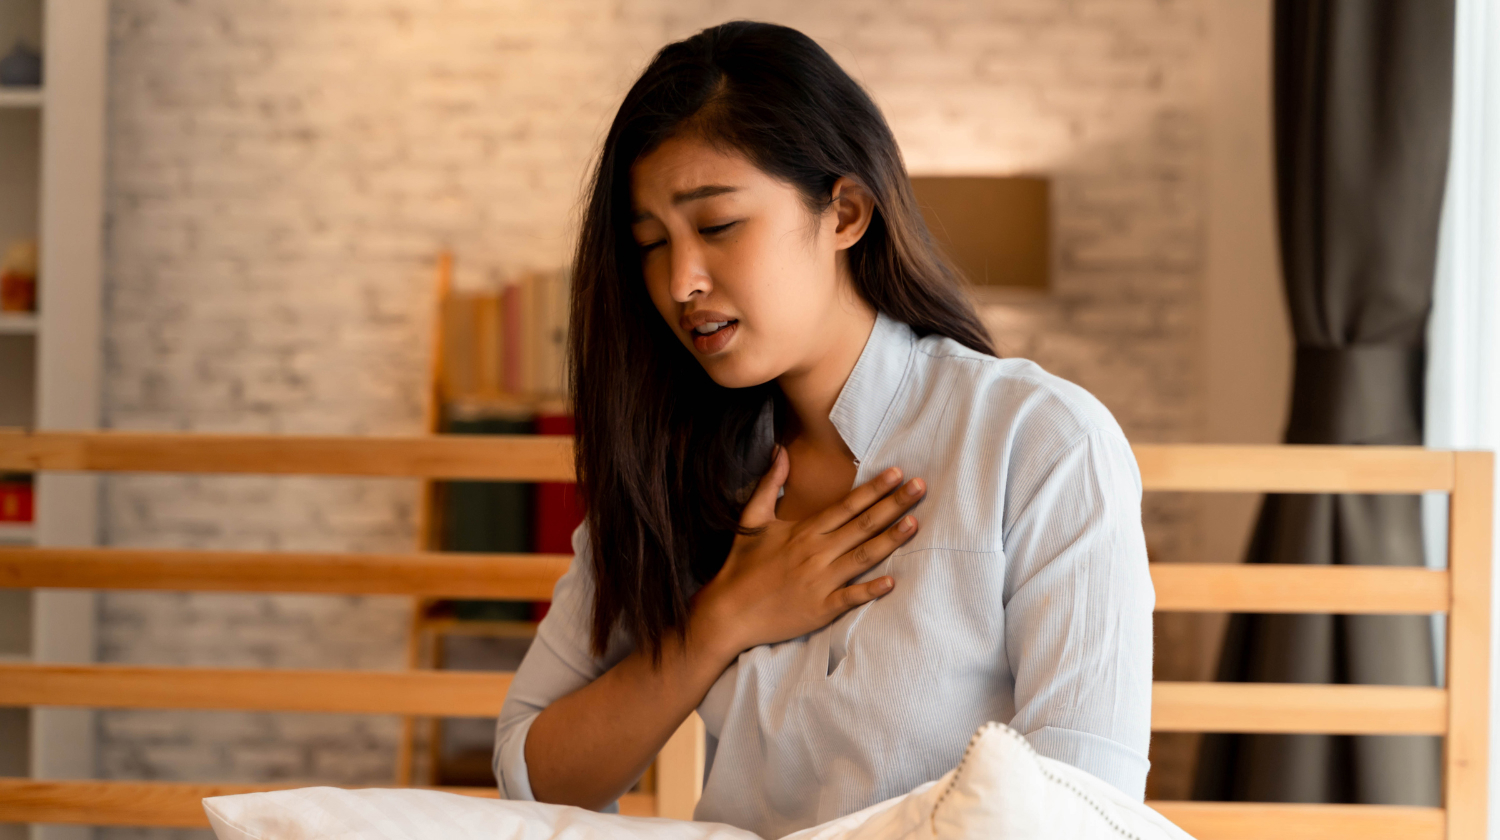 how to tell if shortness of breath is from anxiety